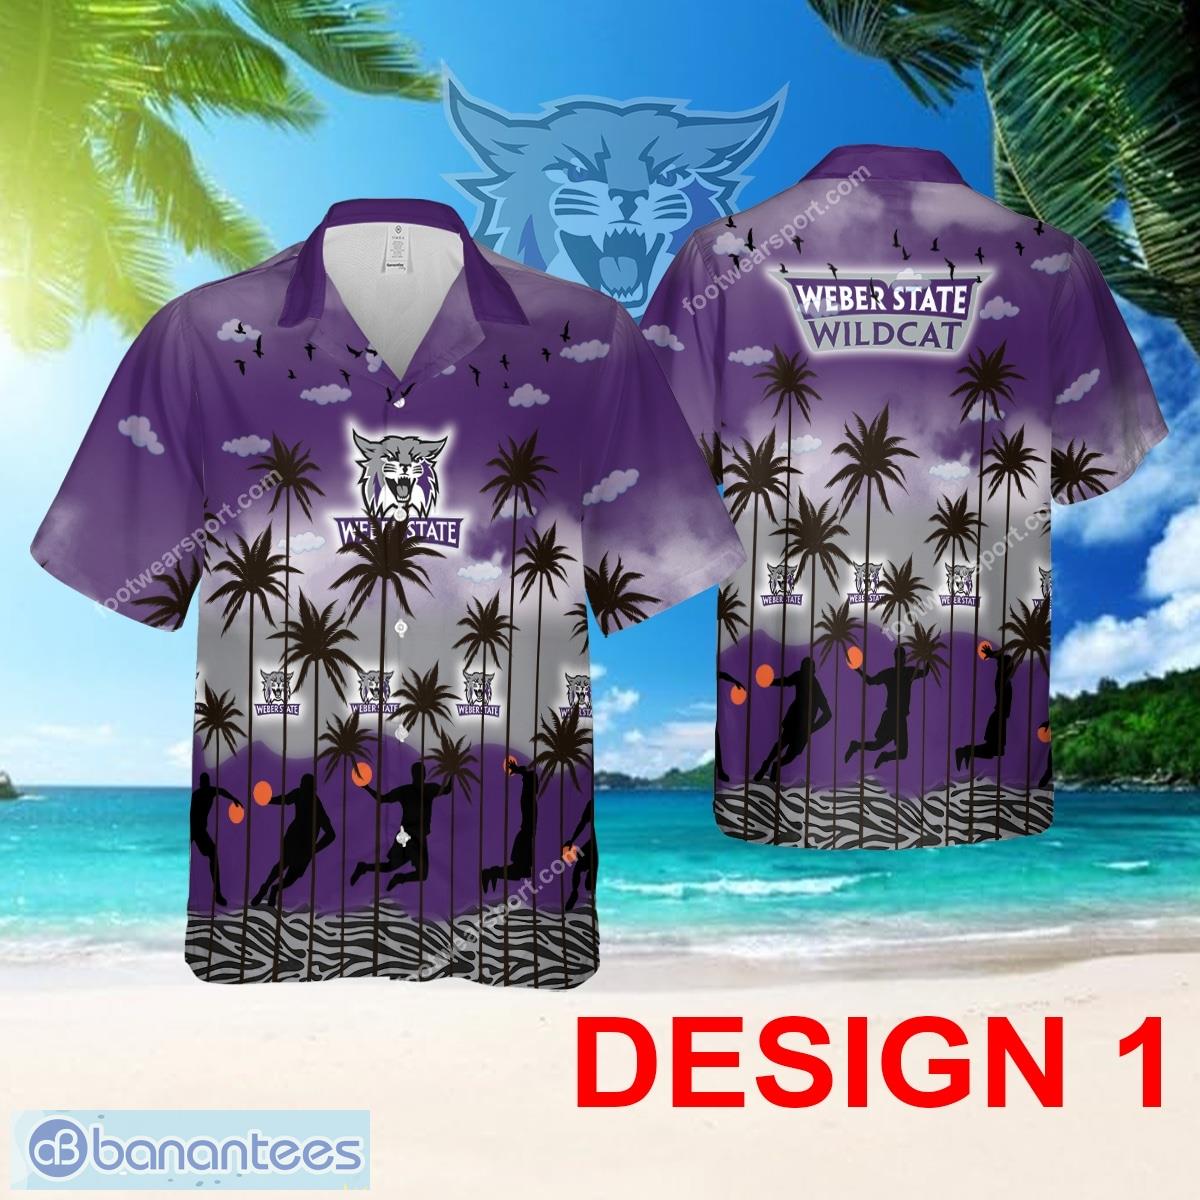 Weber State Wildcats Hawaiian Shirt Pattern Coconut Tree All Over Print For Men And Women - Design 1 NCAA2 Weber State Wildcats Hawaiian Shirt Tree Pattern